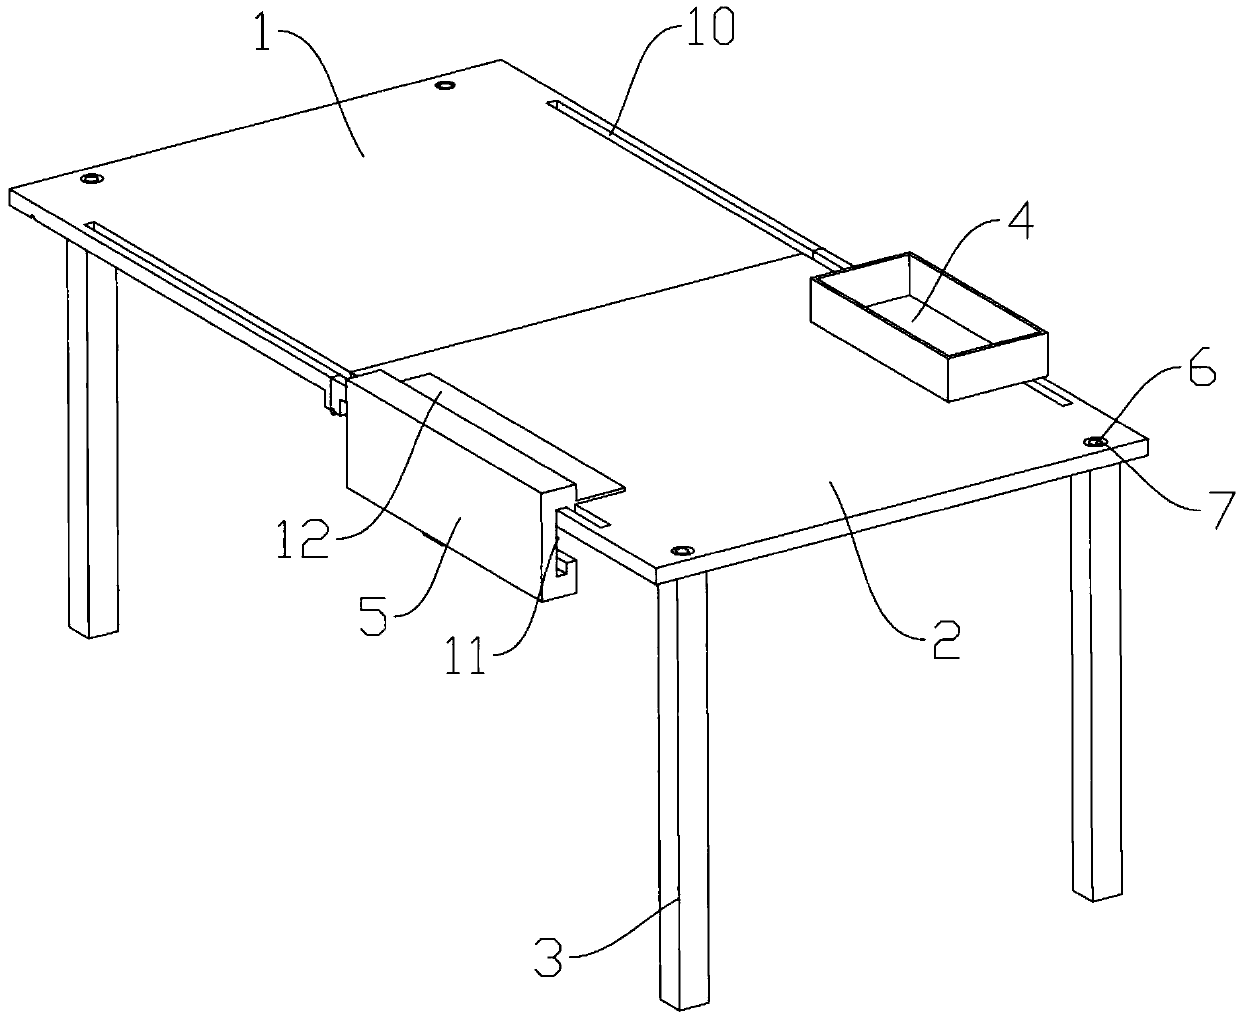 Drawing exhibition table used for environment design